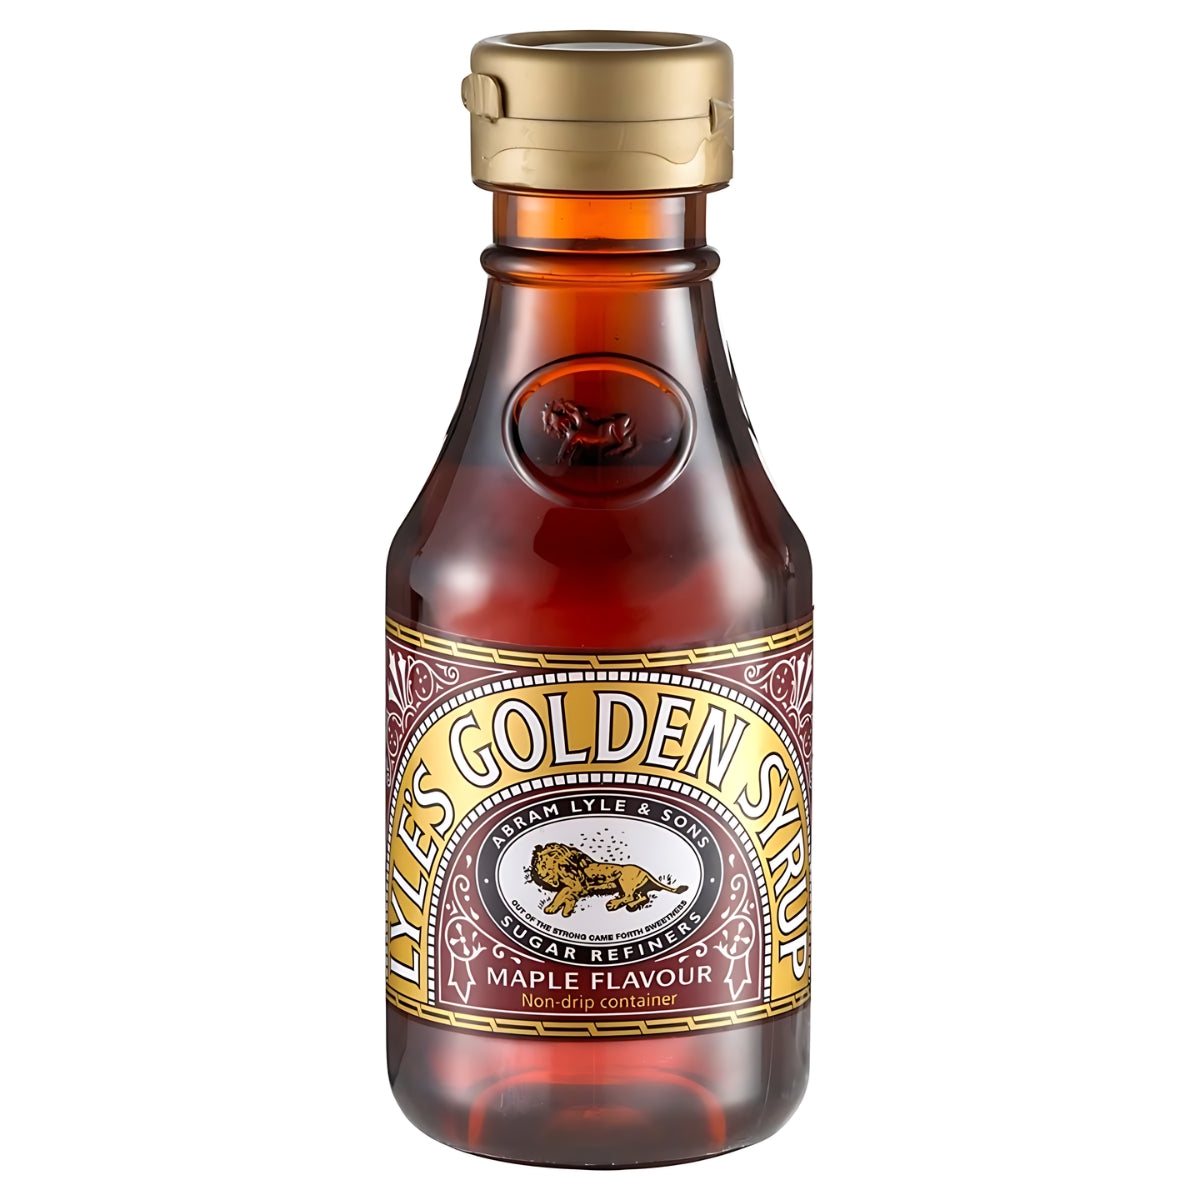 Image of a bottle of Lyles - Golden Syrup Maple Flavour - 454g. The brown bottle with a gold cap and label features a lion logo and text. Perfect for drizzling over pancakes, Lyles - Golden Syrup Maple Flavour - 454g adds a rich maple flavor to your breakfast delights.